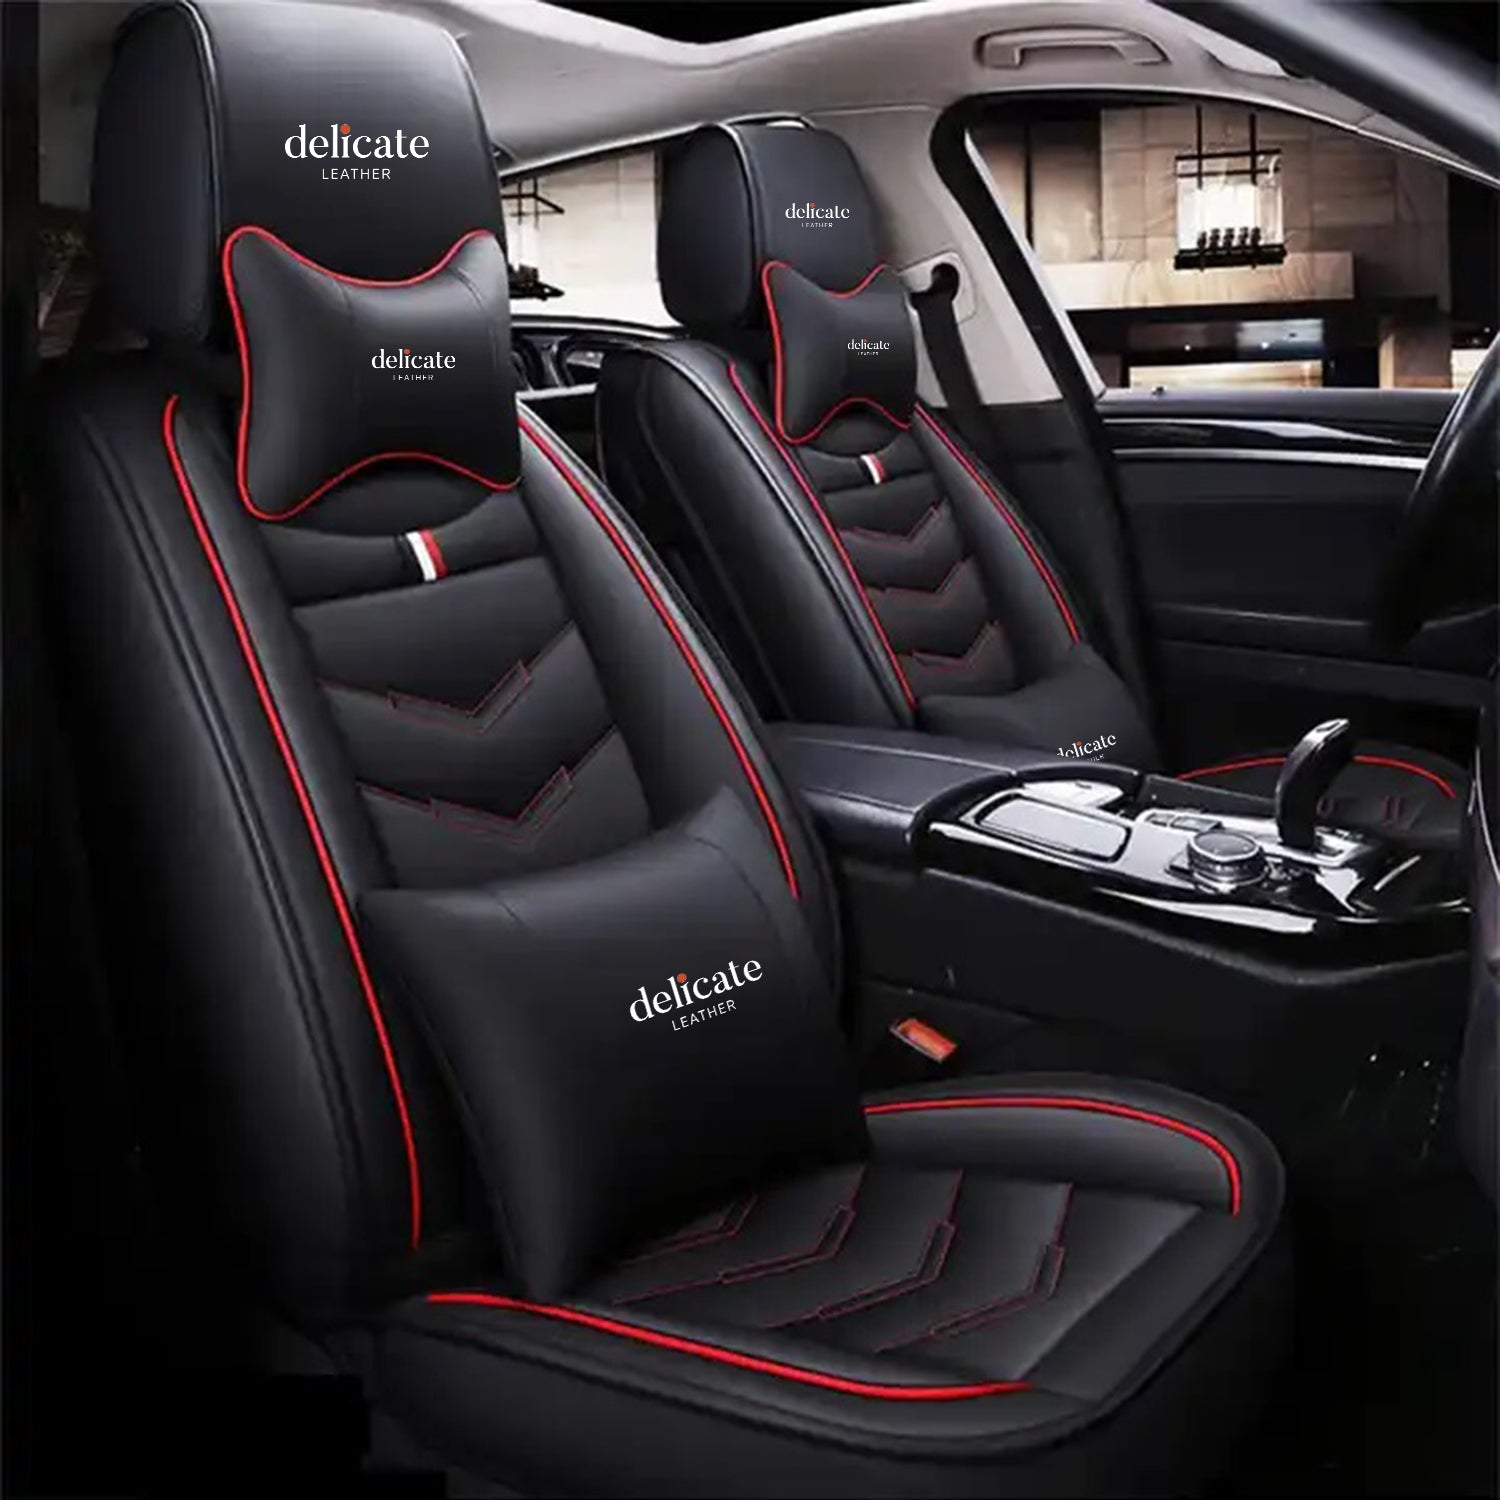 Delicate Leather Car Seat Cover Hot Selling Luxury Durable Comfortable Full Leather Car Seat Cover For All Kinds Of Car Seat Cover - Delicate Leather